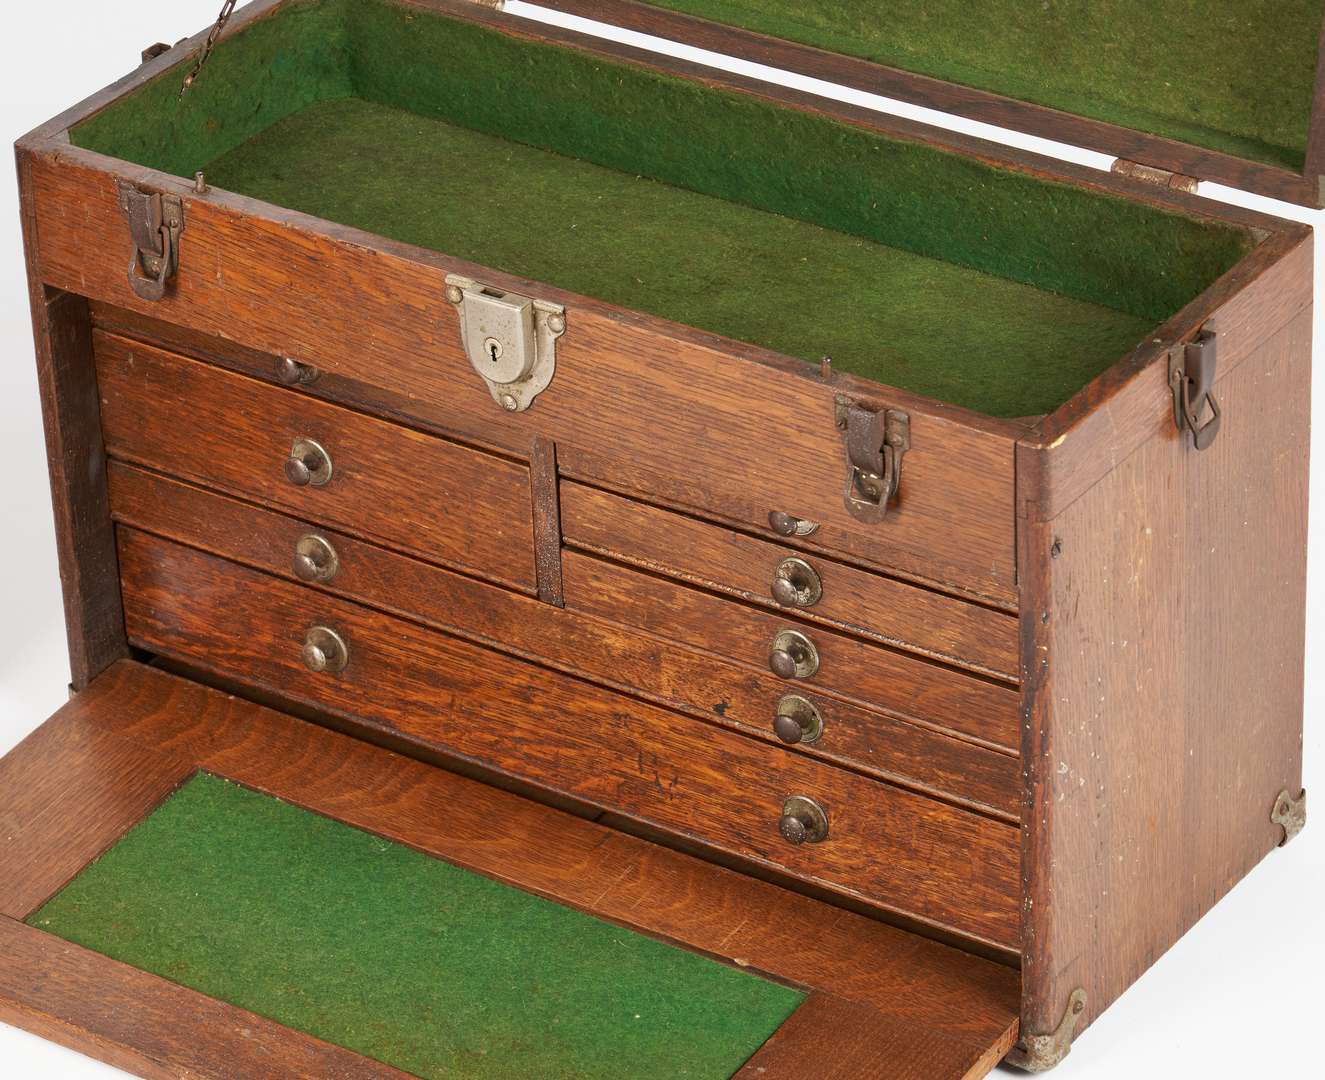 Lot 970: 2 Small Wooden Machinists' Chests